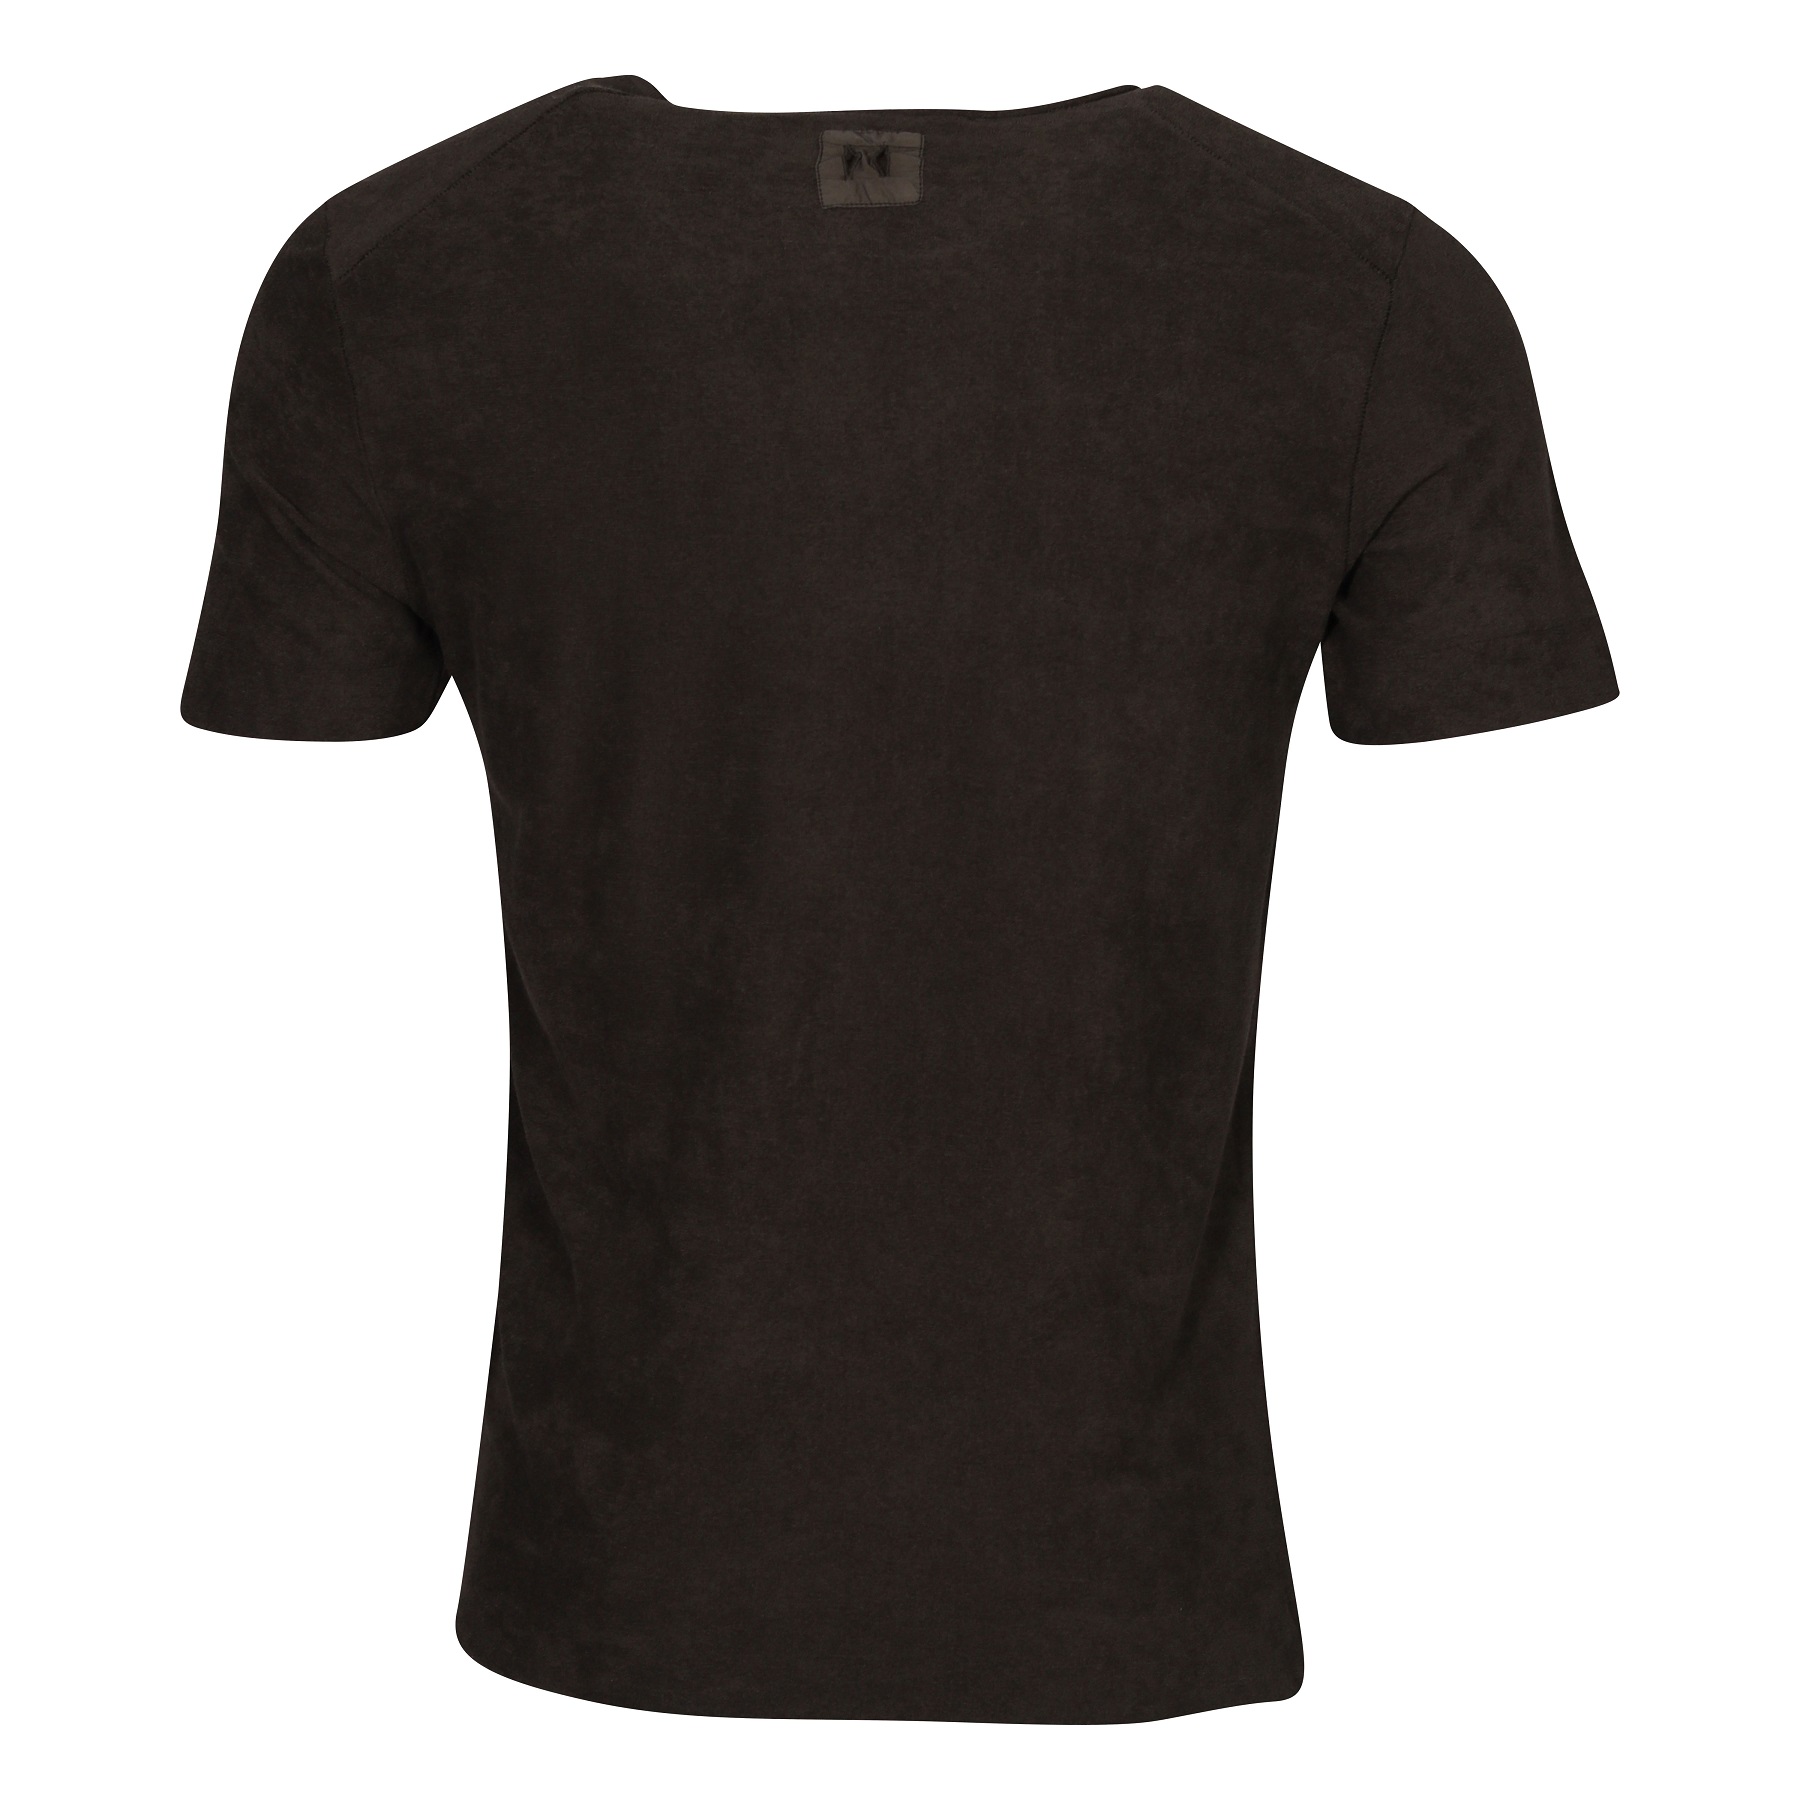 HANNES ROETHER Terry T-Shirt in Brown XL